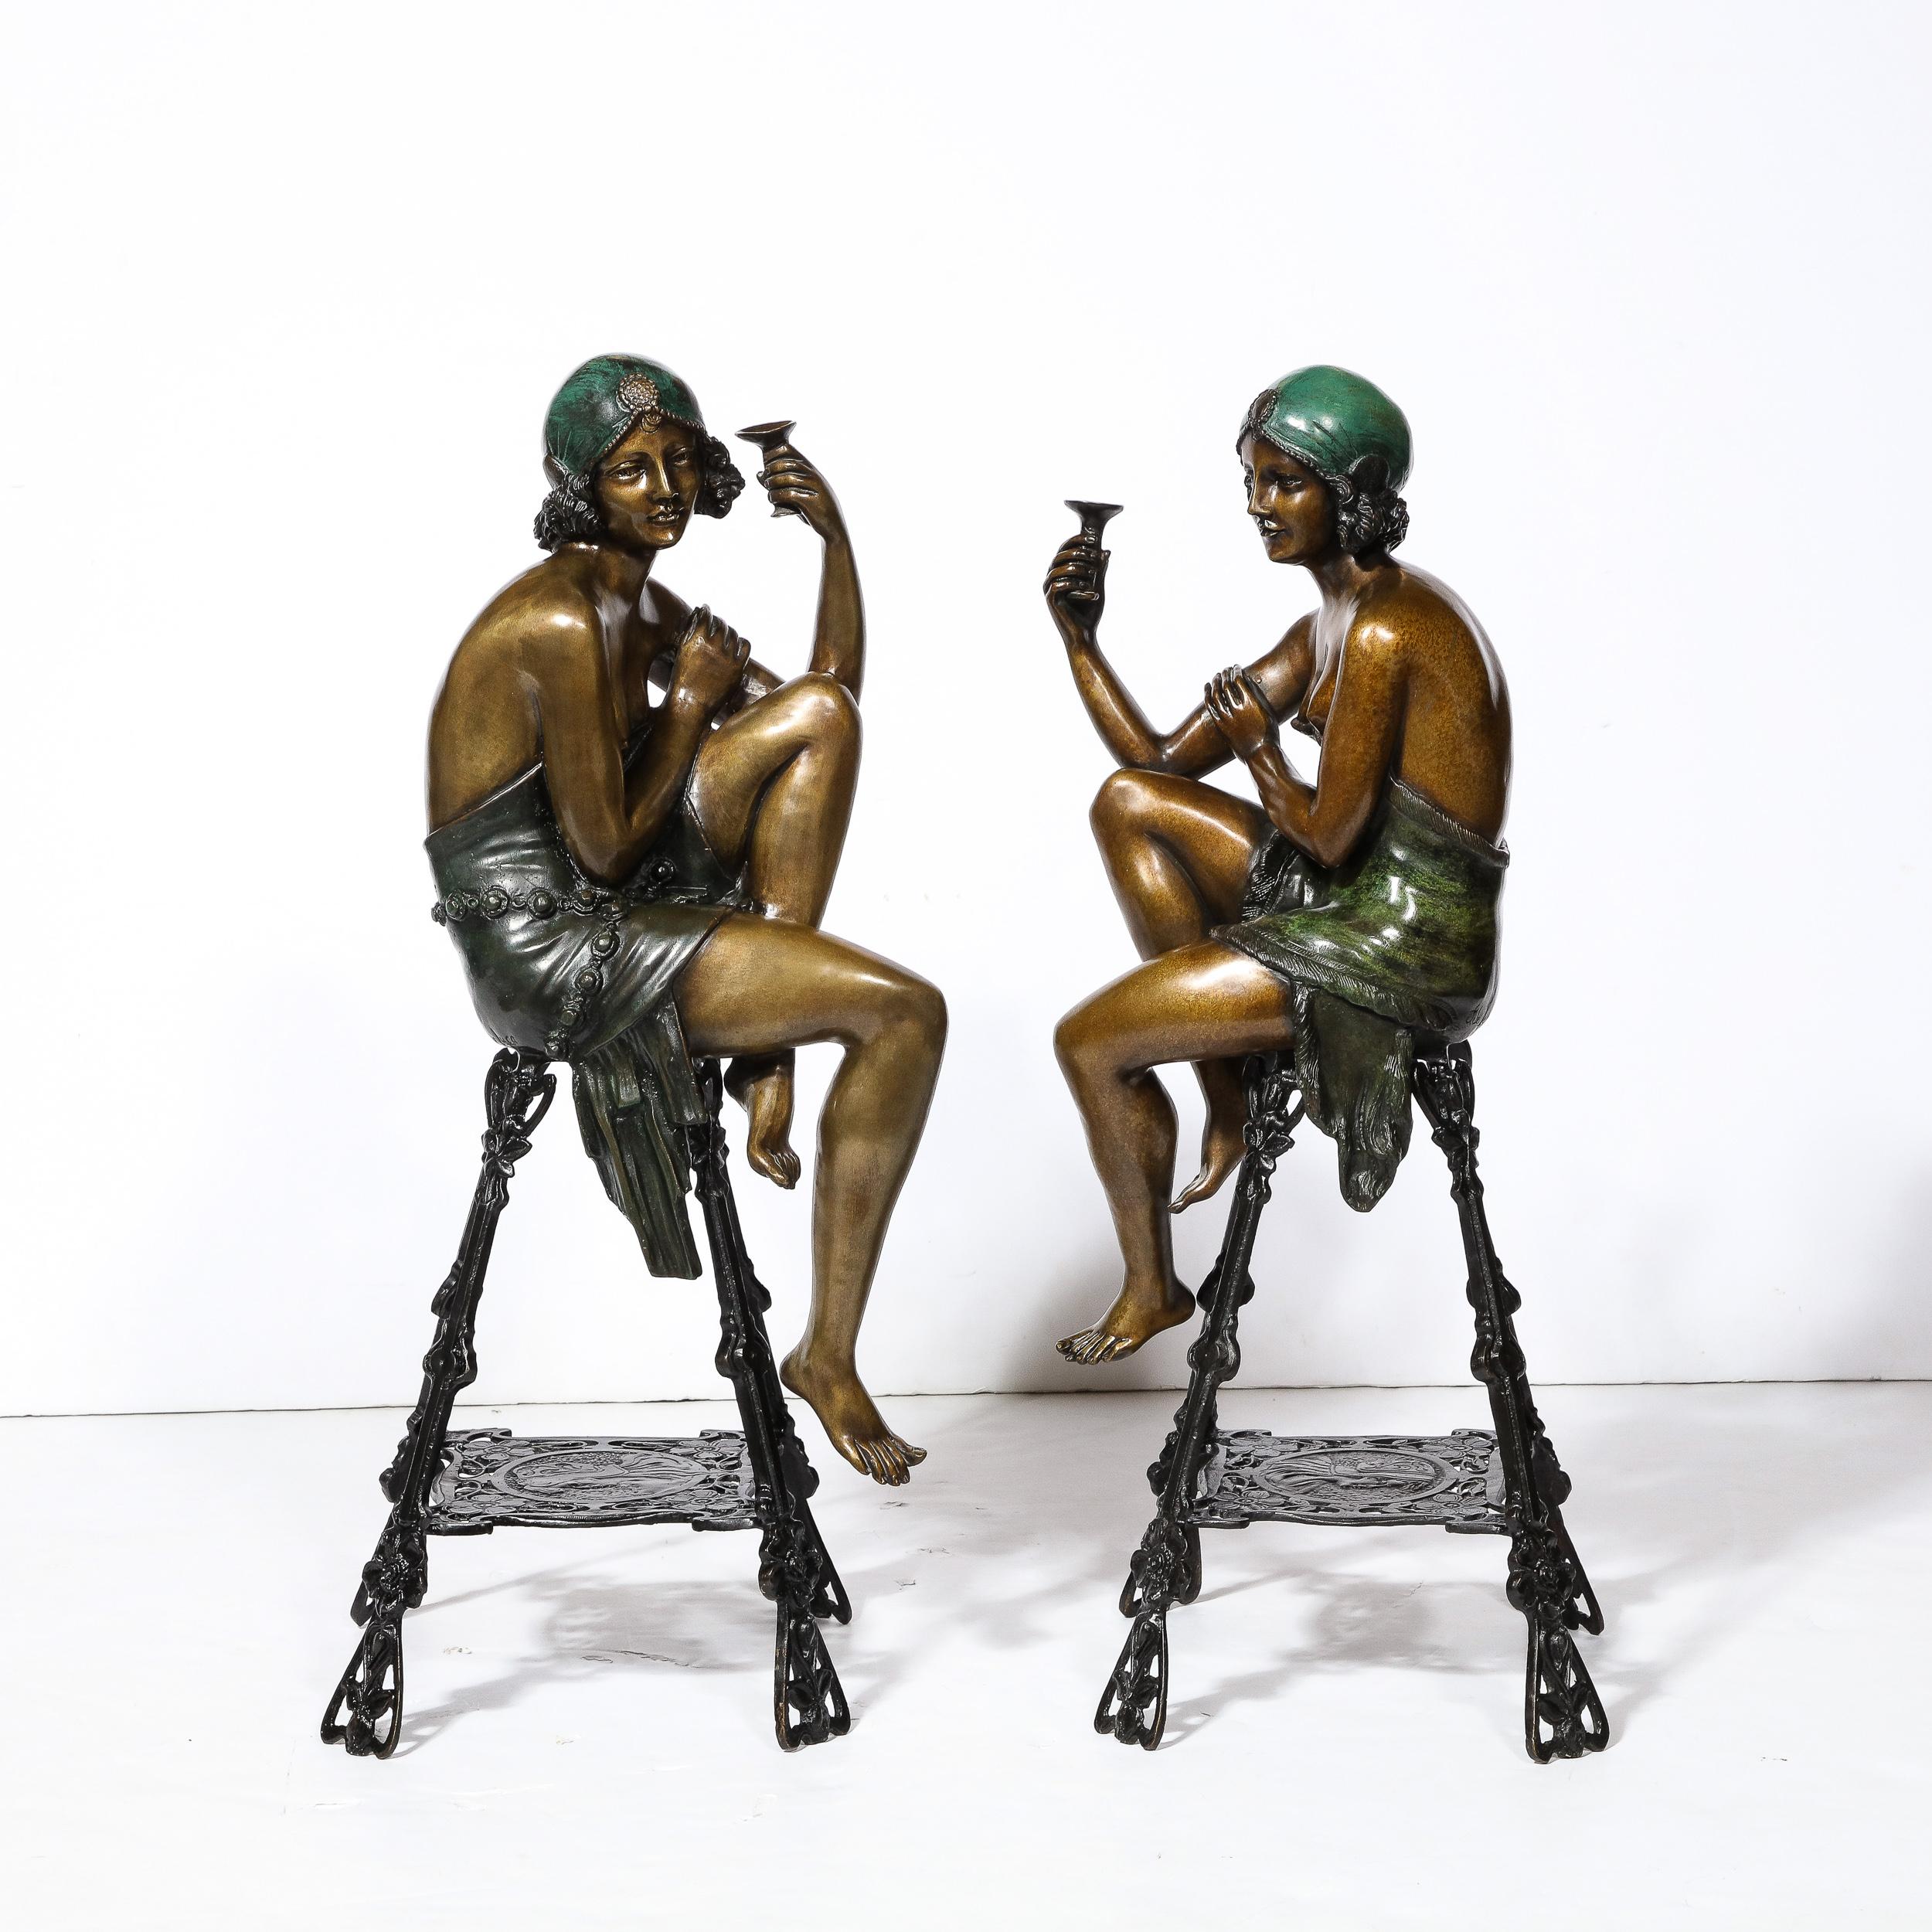 This whimsical pair of Art Deco Bronze and Copper Sculptures of Seated Women by Ferdinando De Luca originate from Italy during the dawn of the 20th Century. Featuring a pair of women seated on stylized Art Nouveau open framed stools, the sculptures